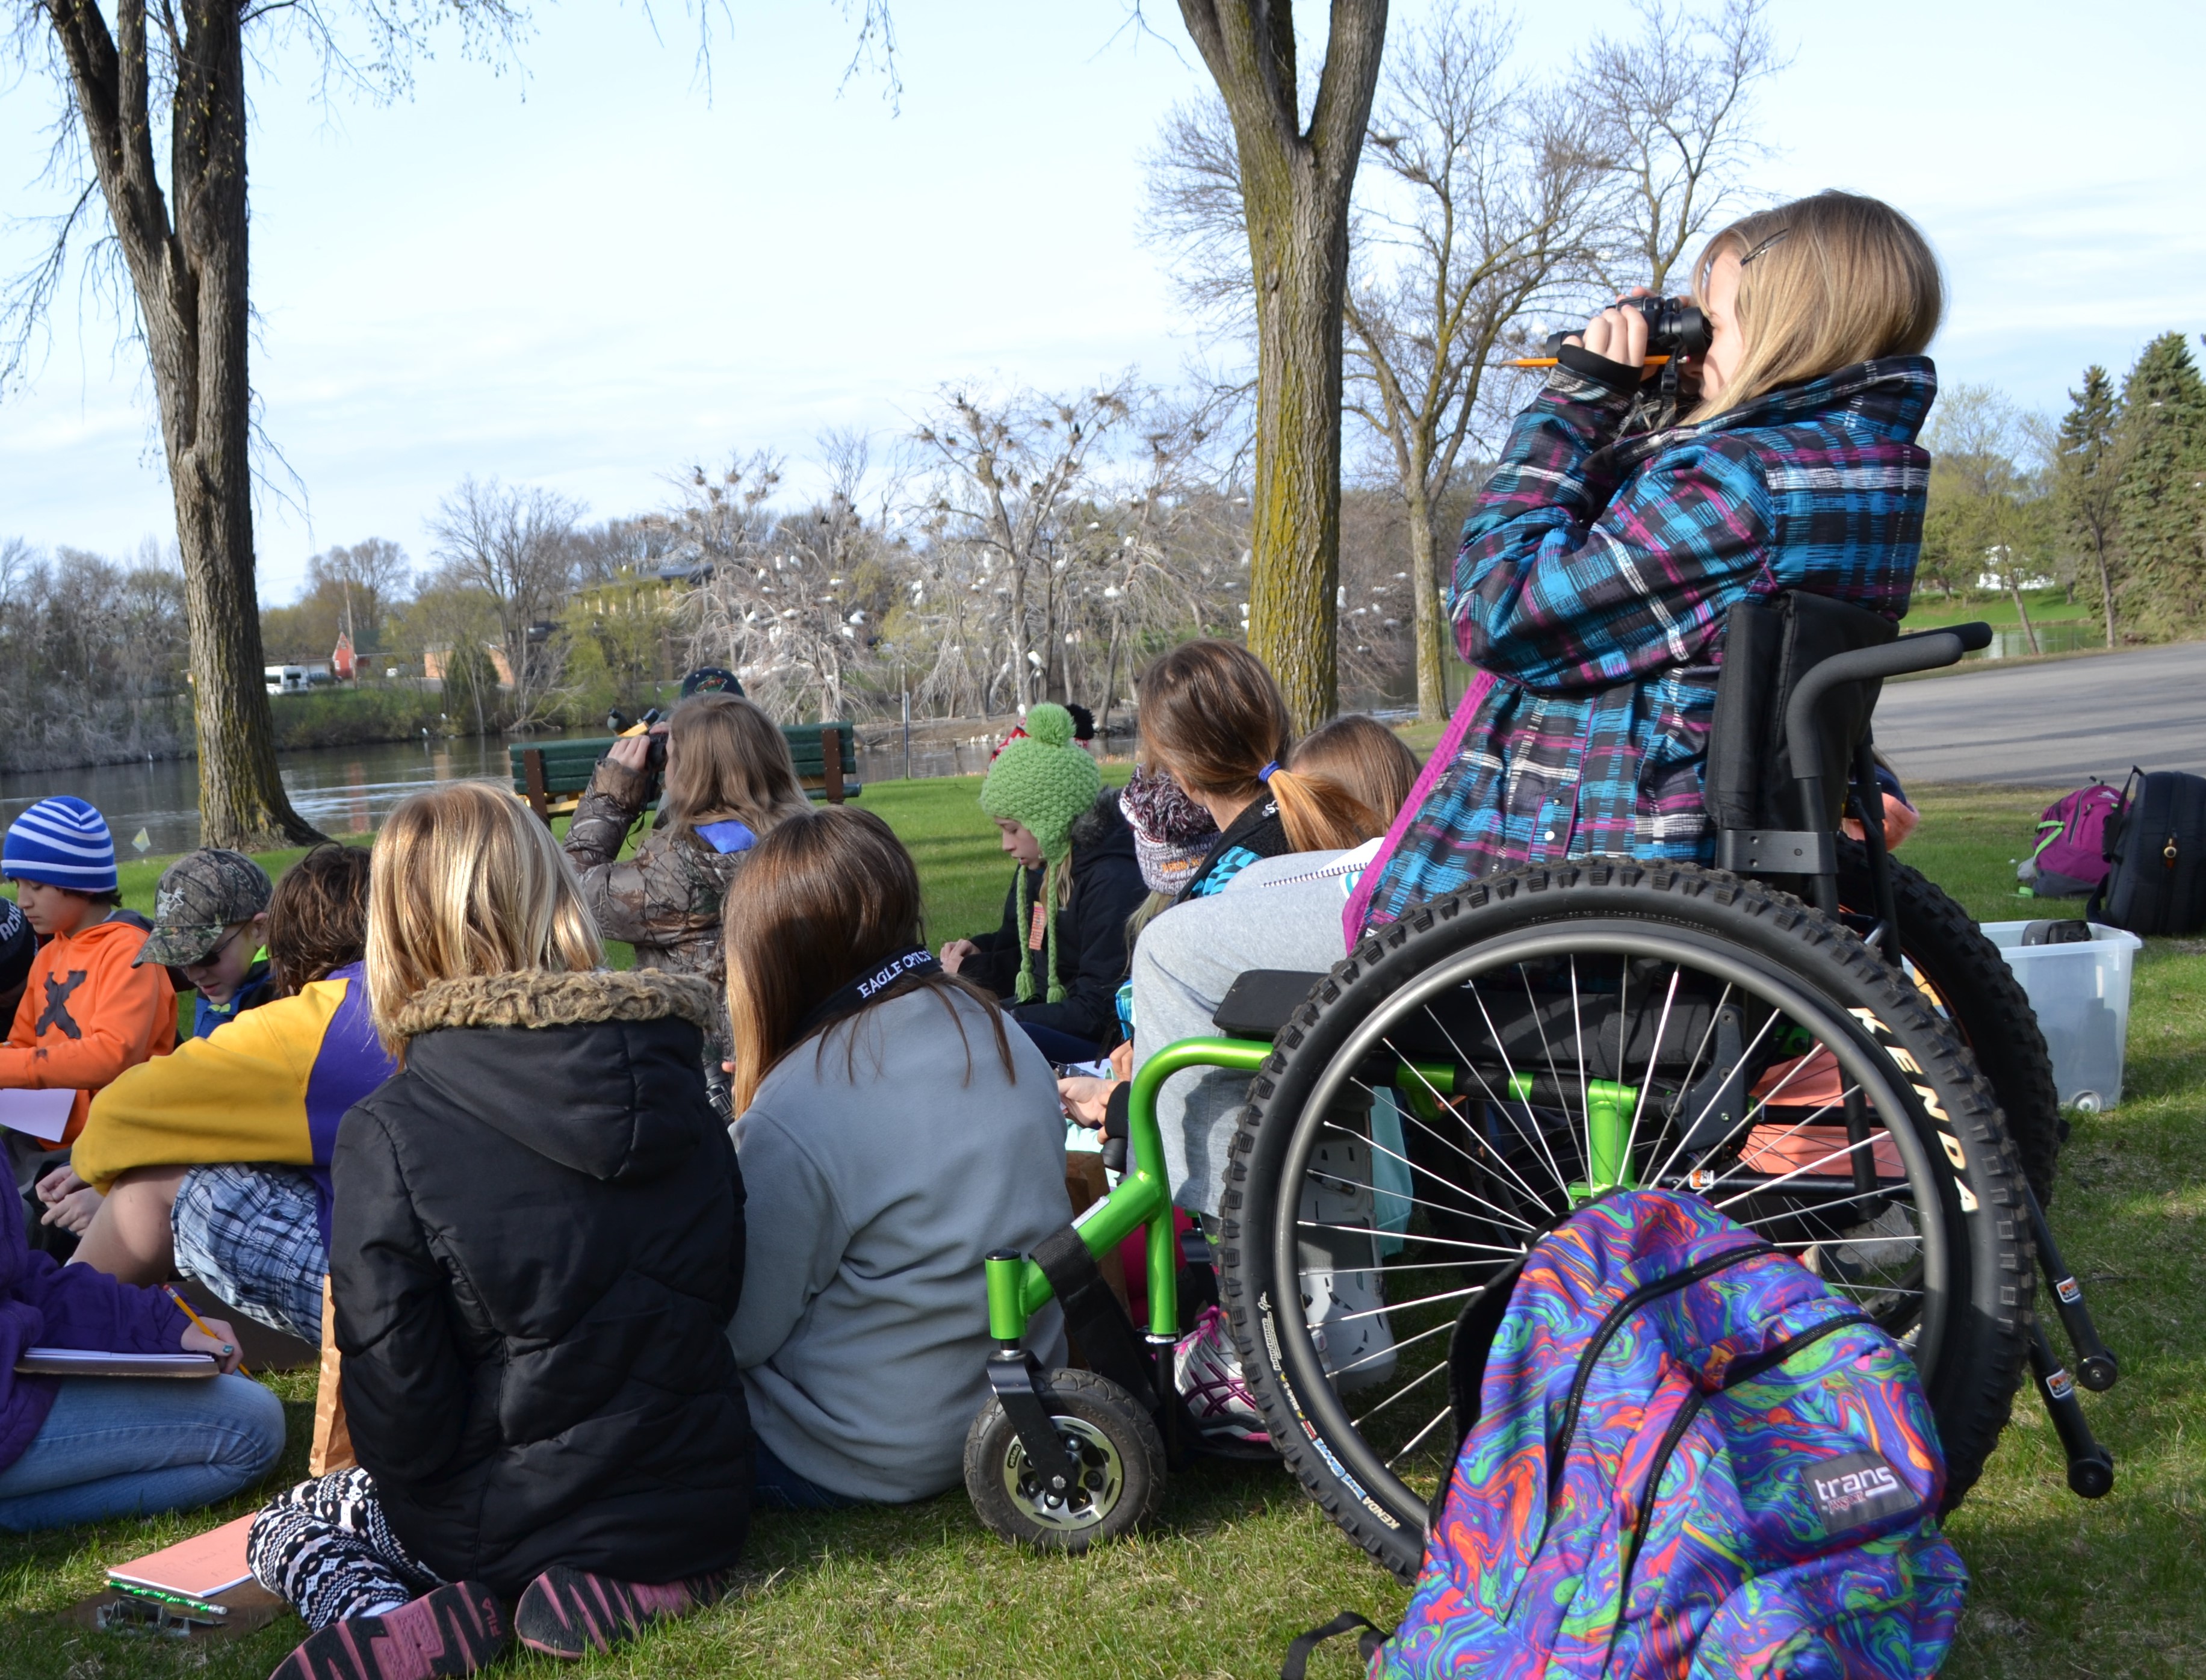 A student in a wheelchair using binoculars to watch birds with her class sitting on the ground